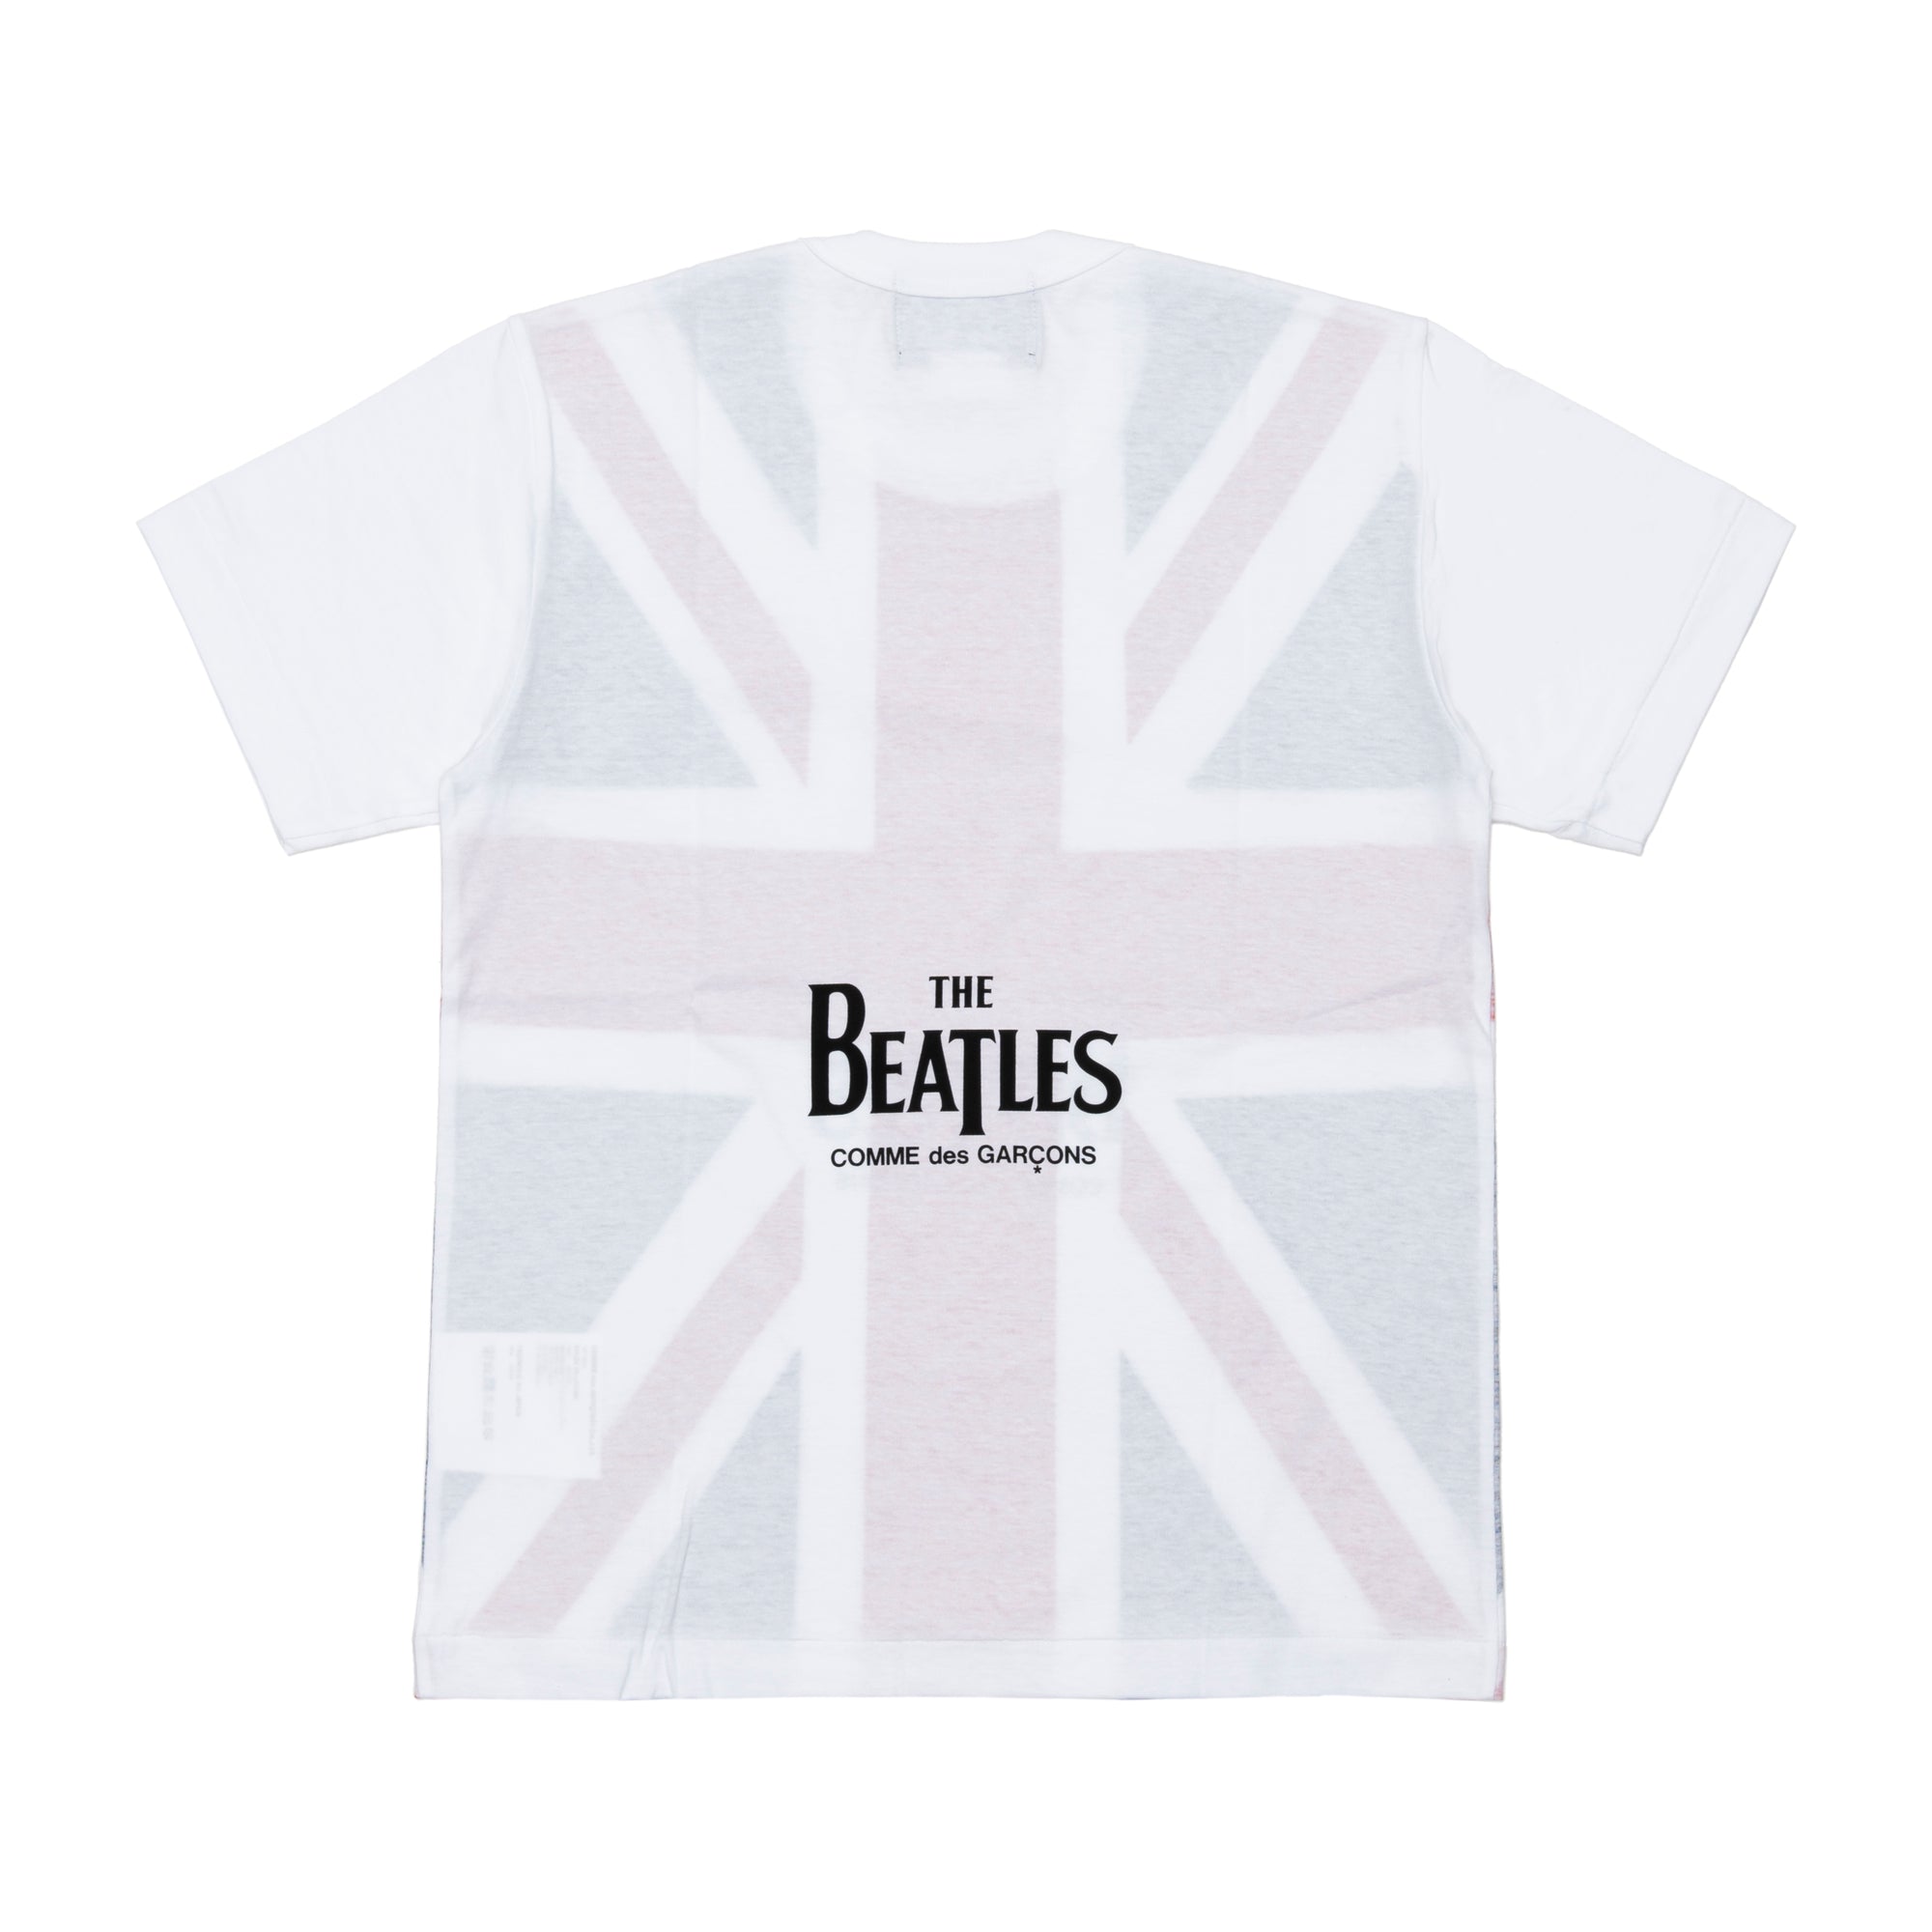 The Beatles CDG - Union Jack Cotton S/S Tee - (White) view 2